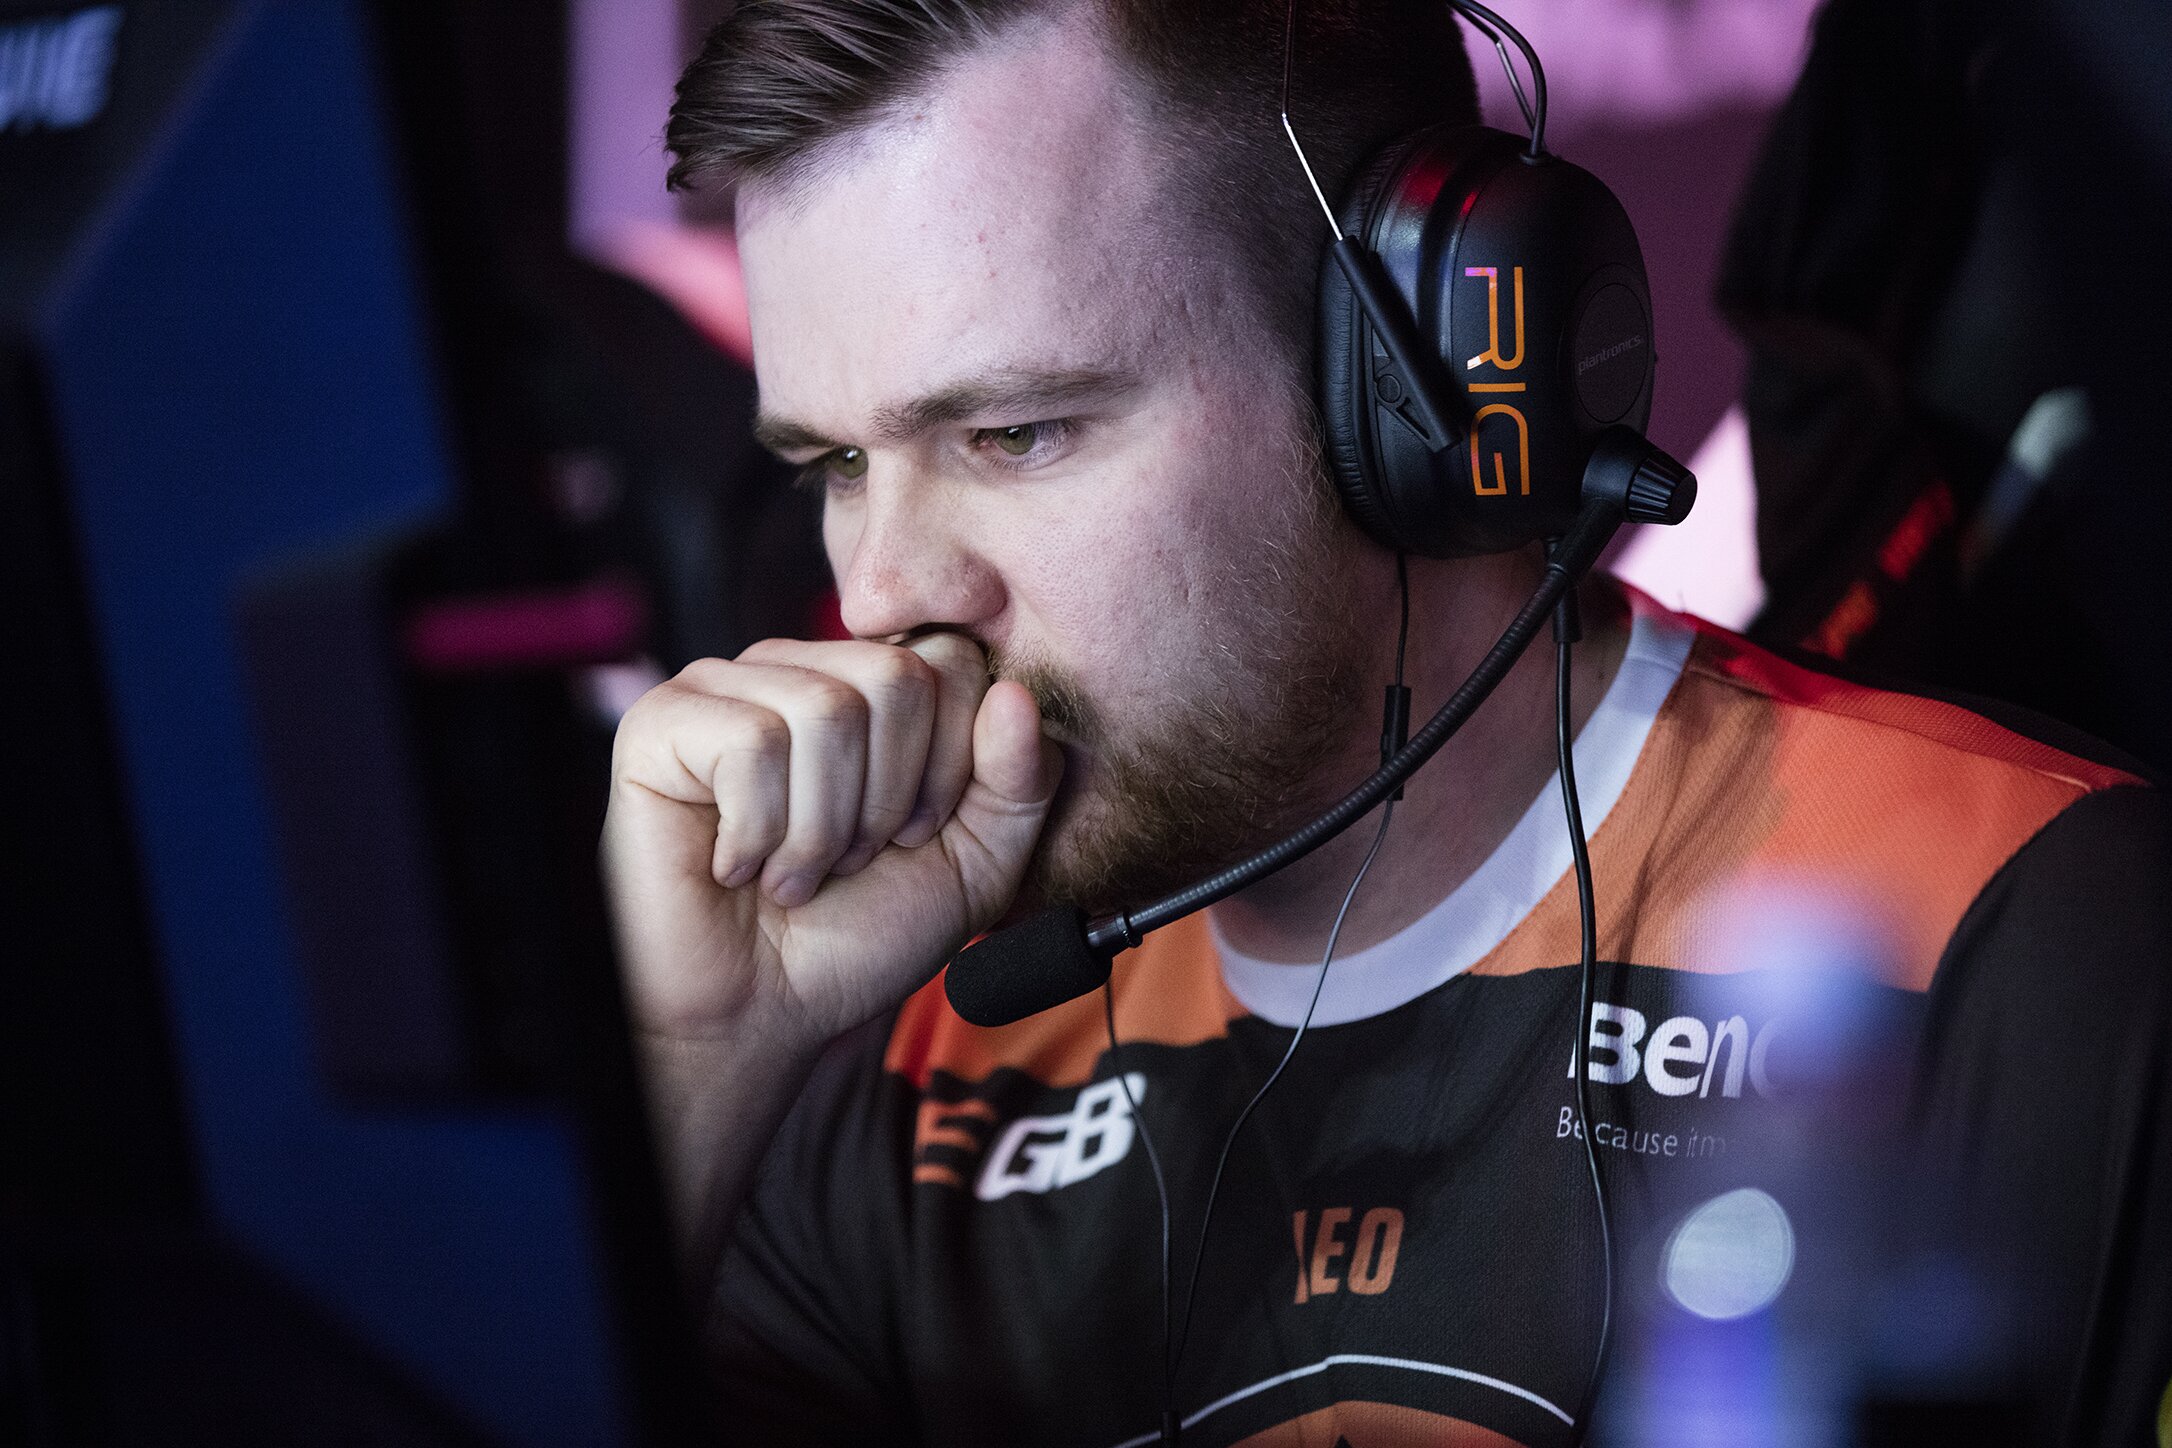 One can’t talk about CS:GO without talking about legendary Polish veterans Virtus.pro. However, the roster had seen a significant decline in performance.